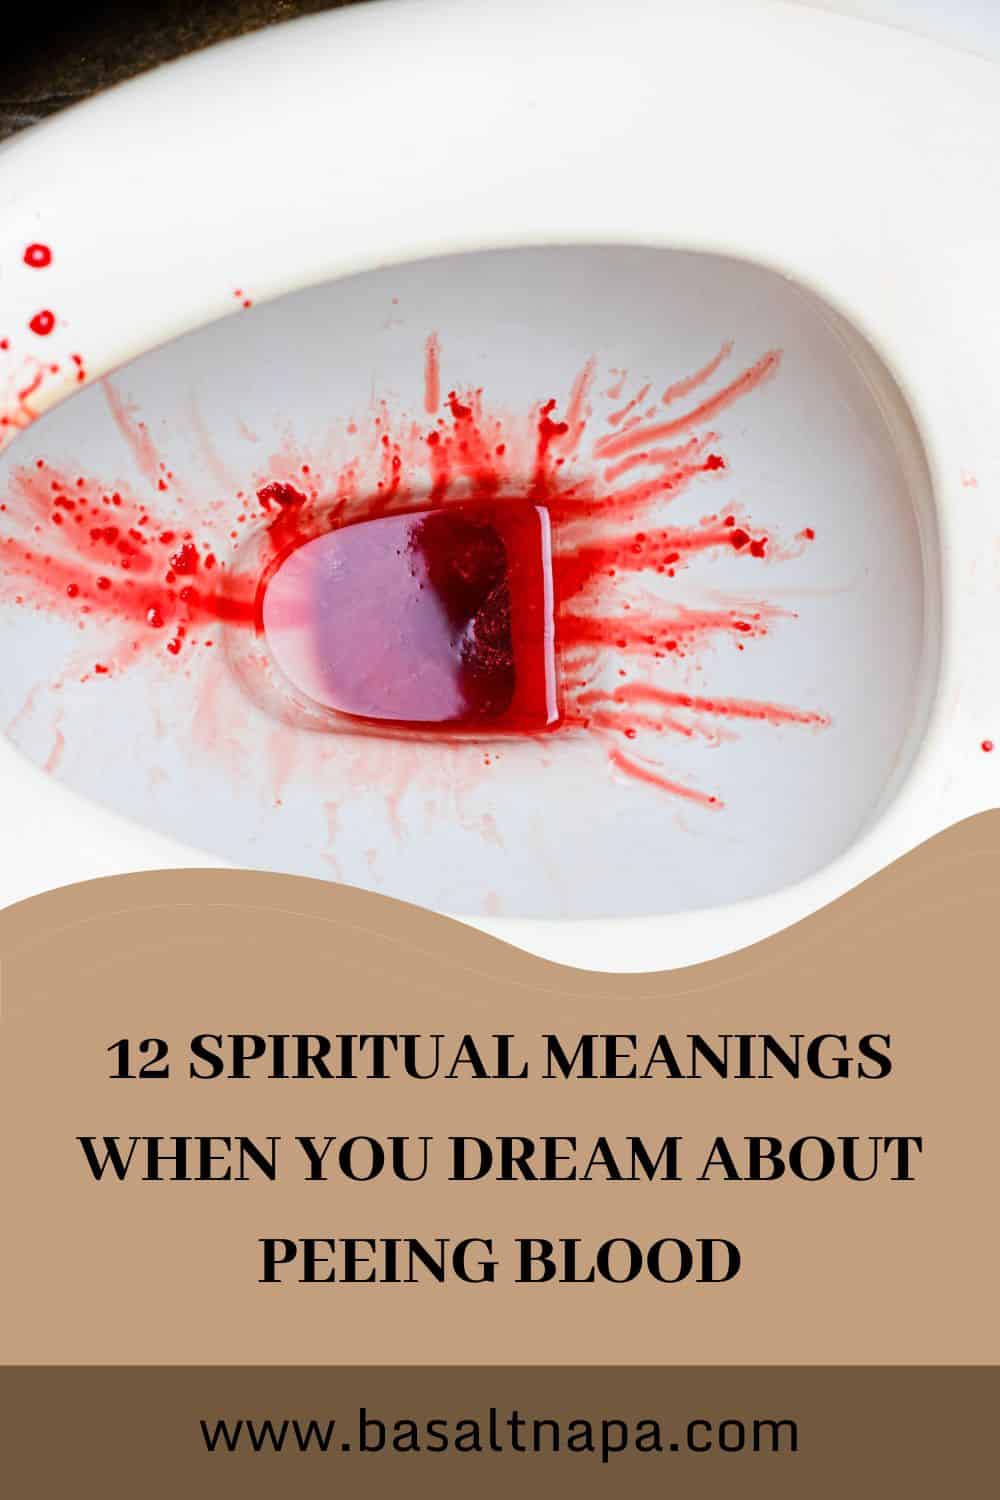 Spiritual Meaning of Dreaming About Peeing Blood